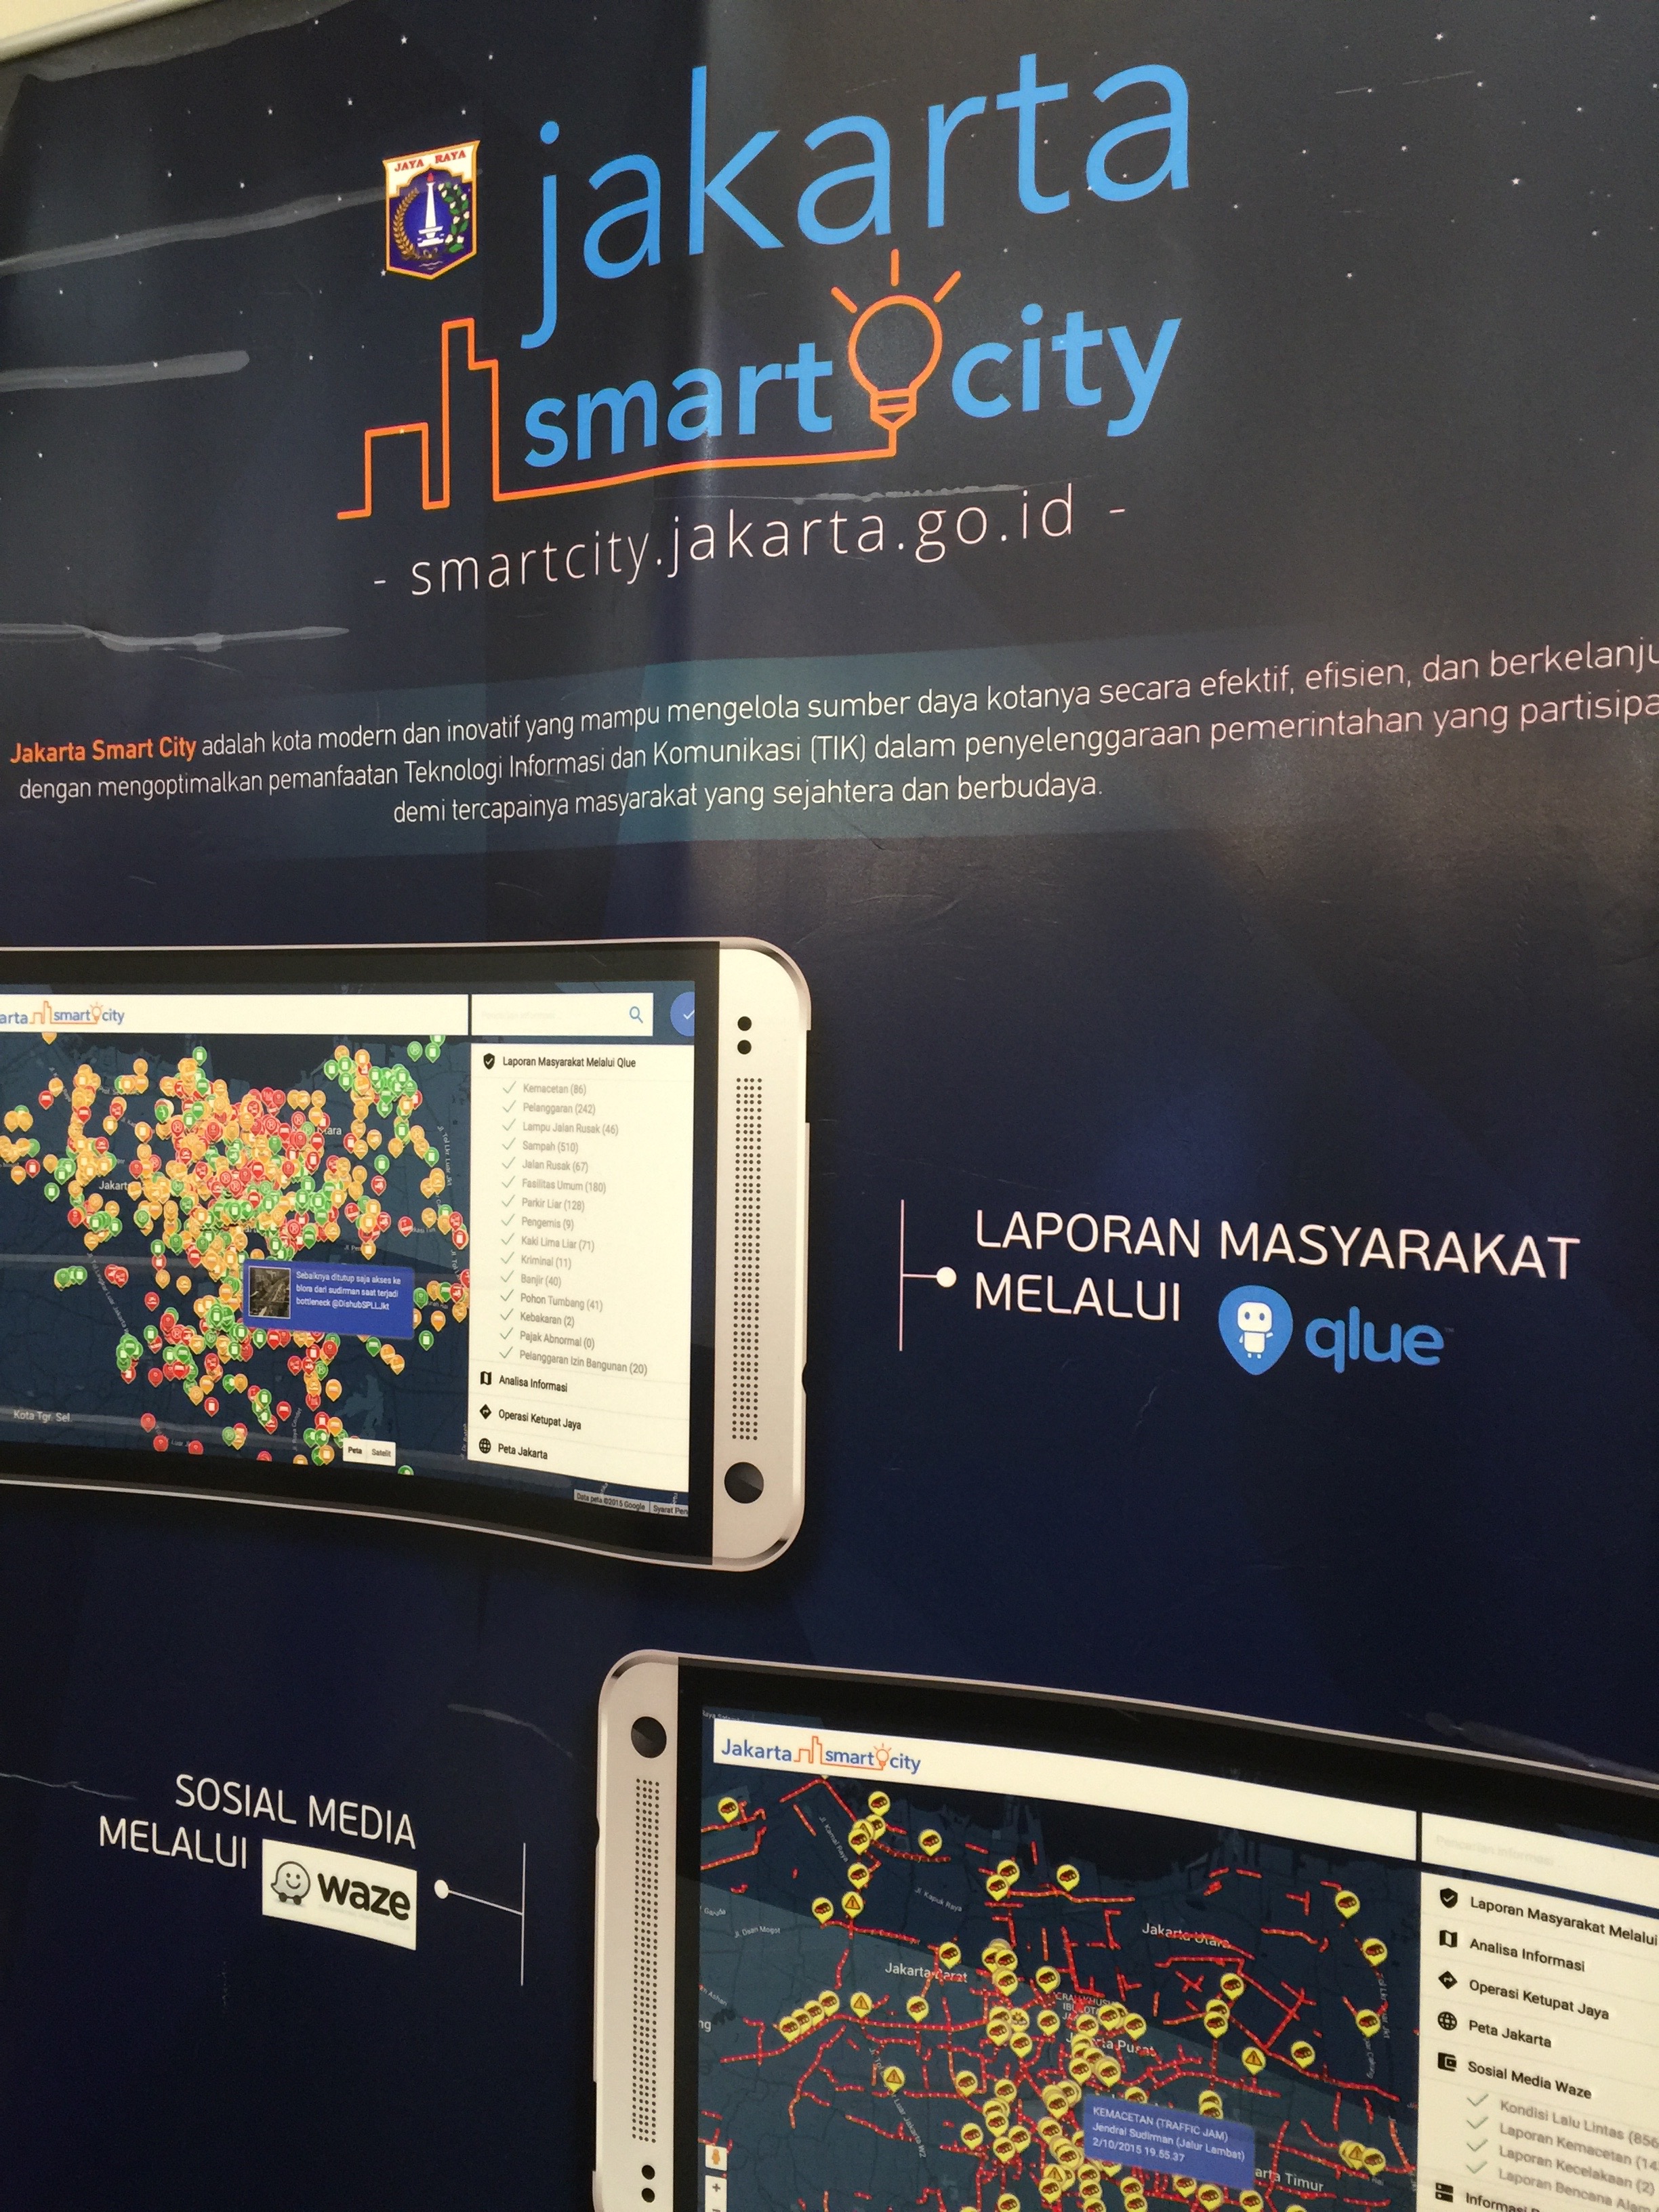 City of Jakarta, Using a Command Center to Fuel Innovation